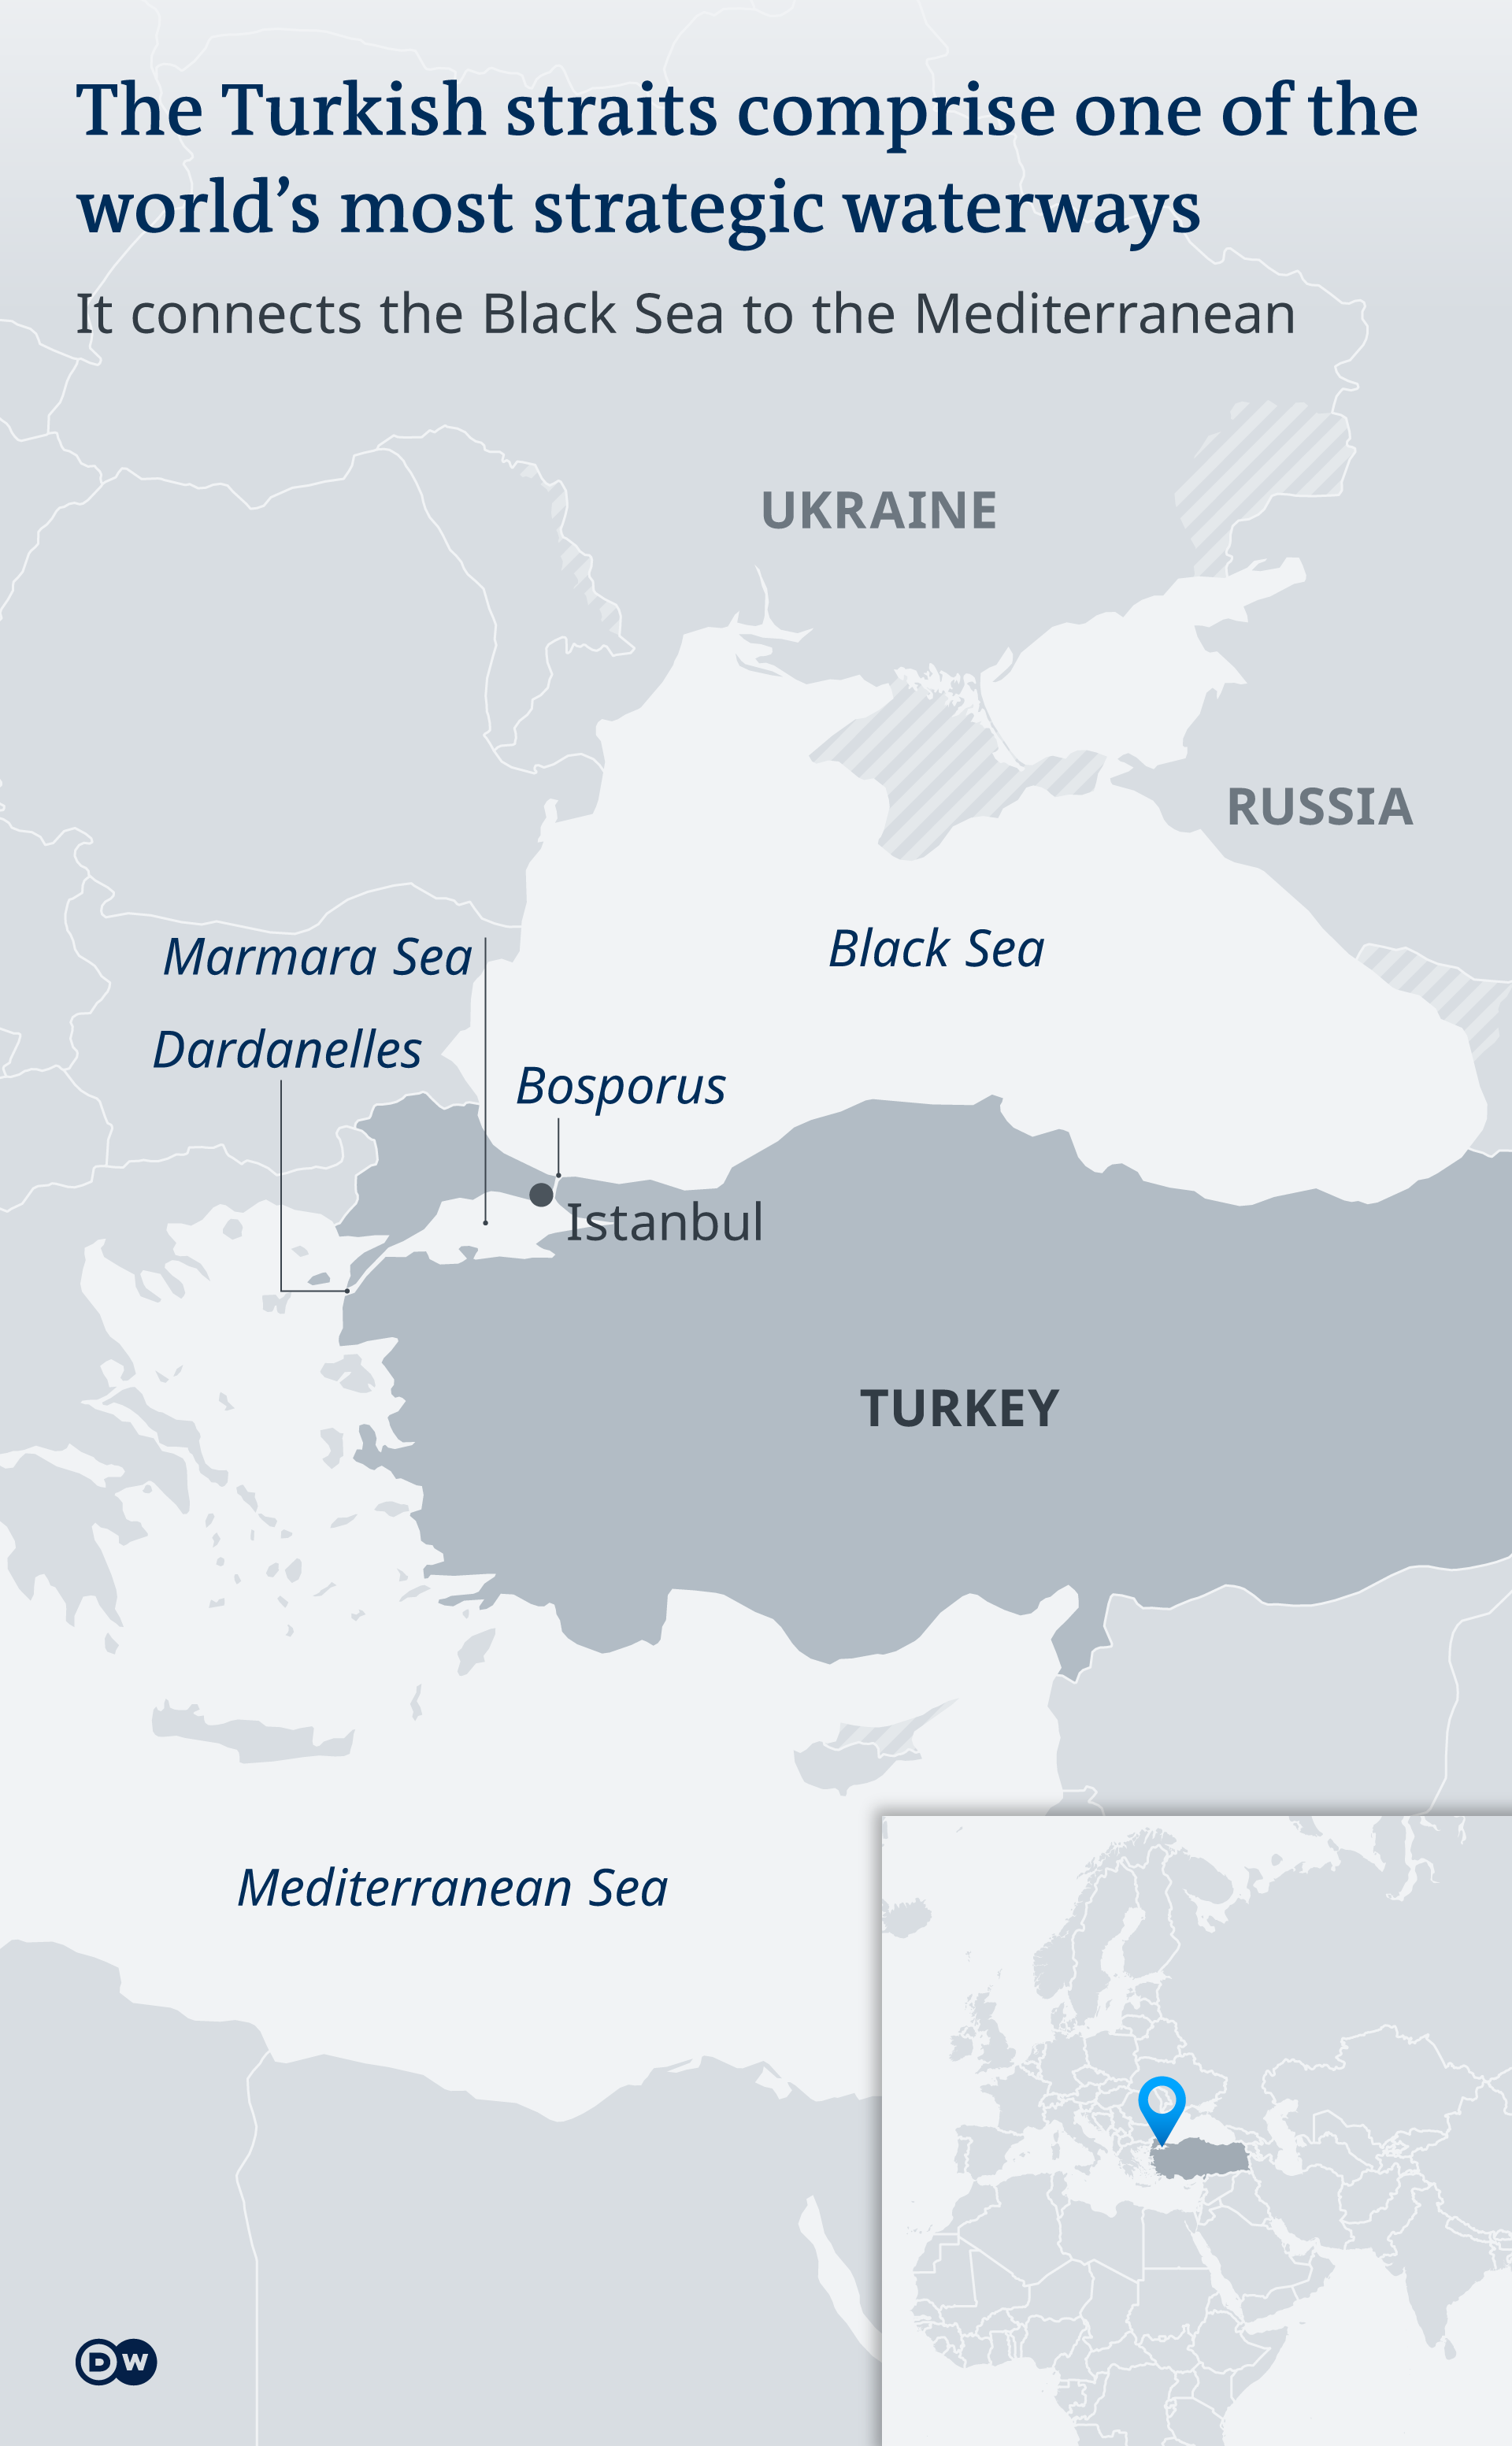 A map showing the importance of Turkey's straits in the Black Sea